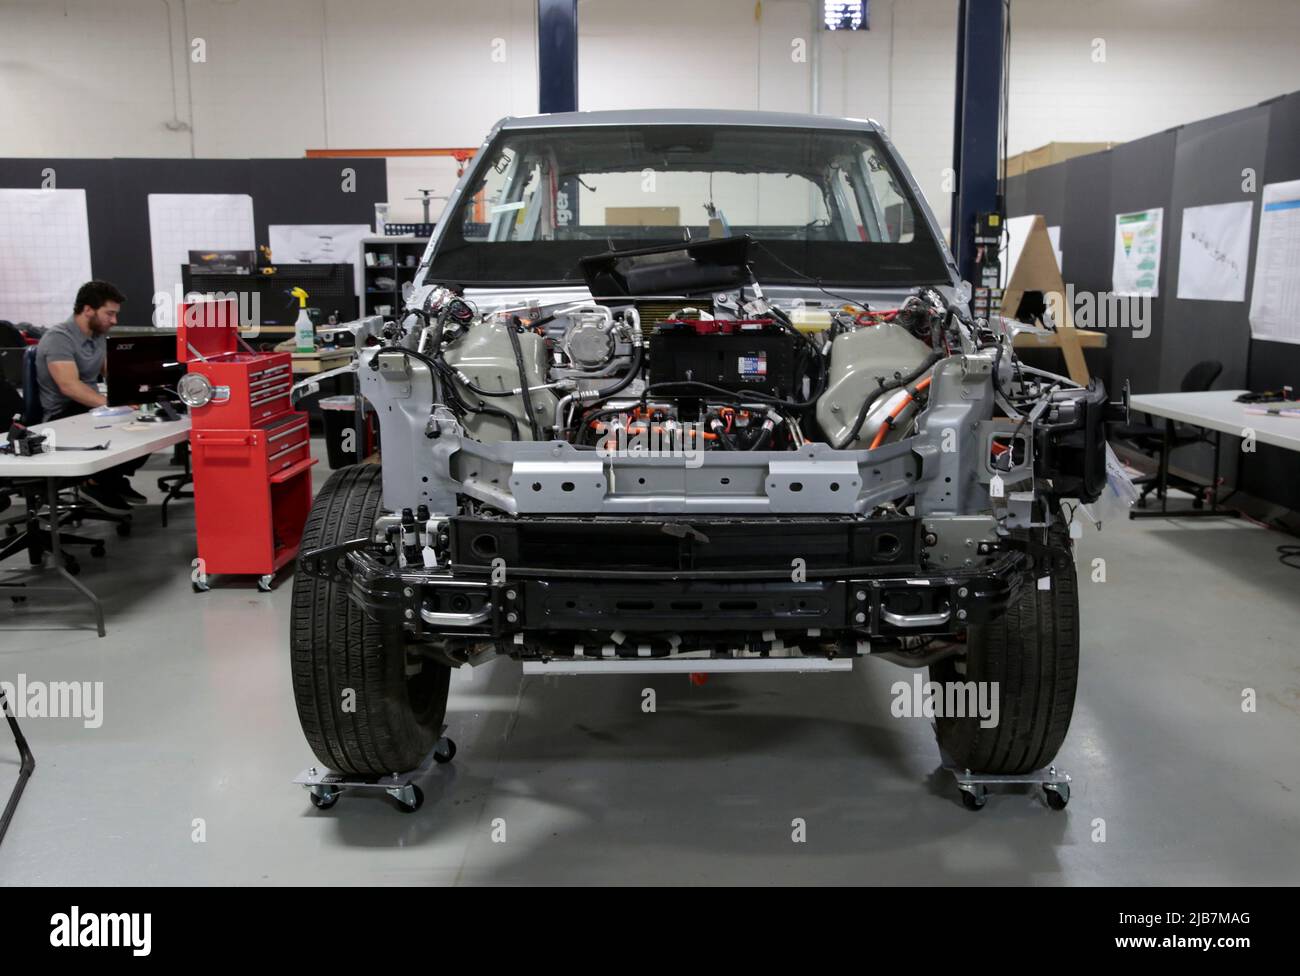 A partially dismantled Rivian R1T electric truck is seen during its teardown at the Munro & Associates headquarters in Auburn Hills, Michigan, U.S., June 3, 2022.  REUTERS/Rebecca Cook Stock Photo